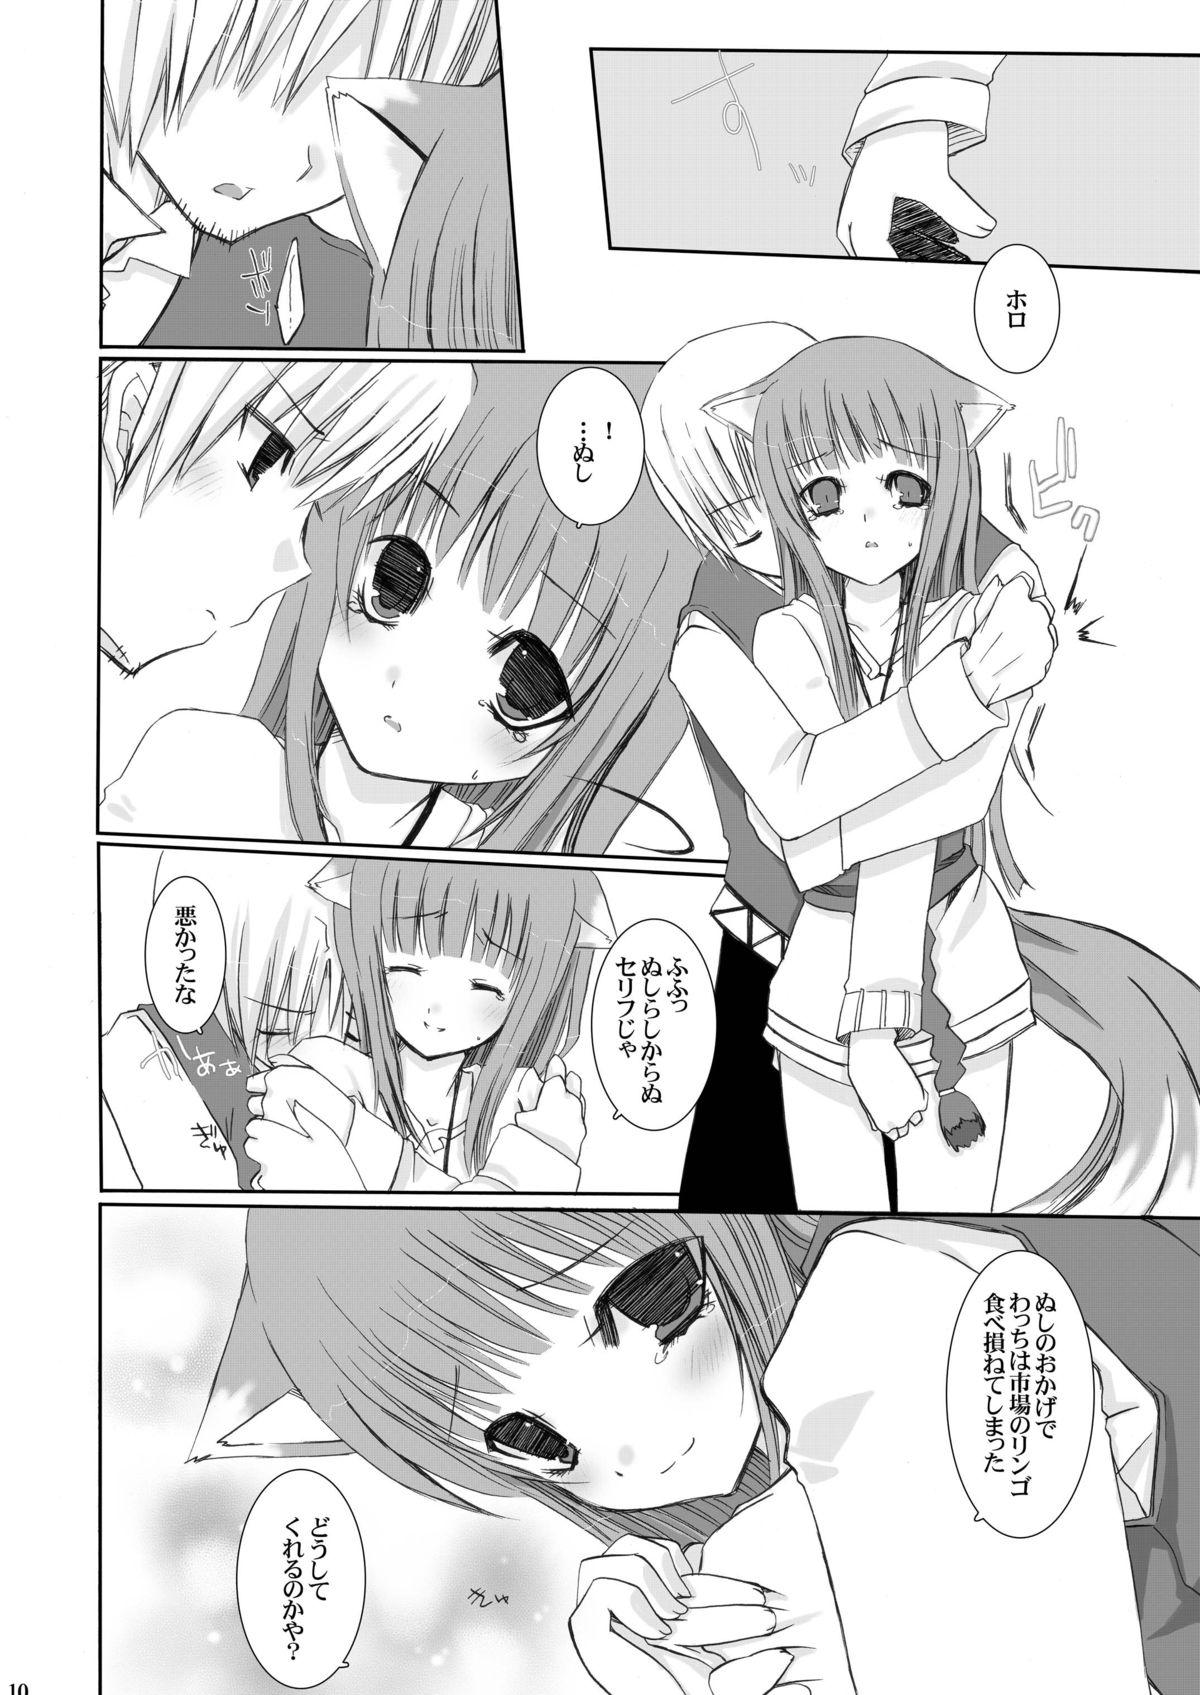 Orgasmus Fukigen na Ookami - Spice and wolf Girl Fuck - Page 10